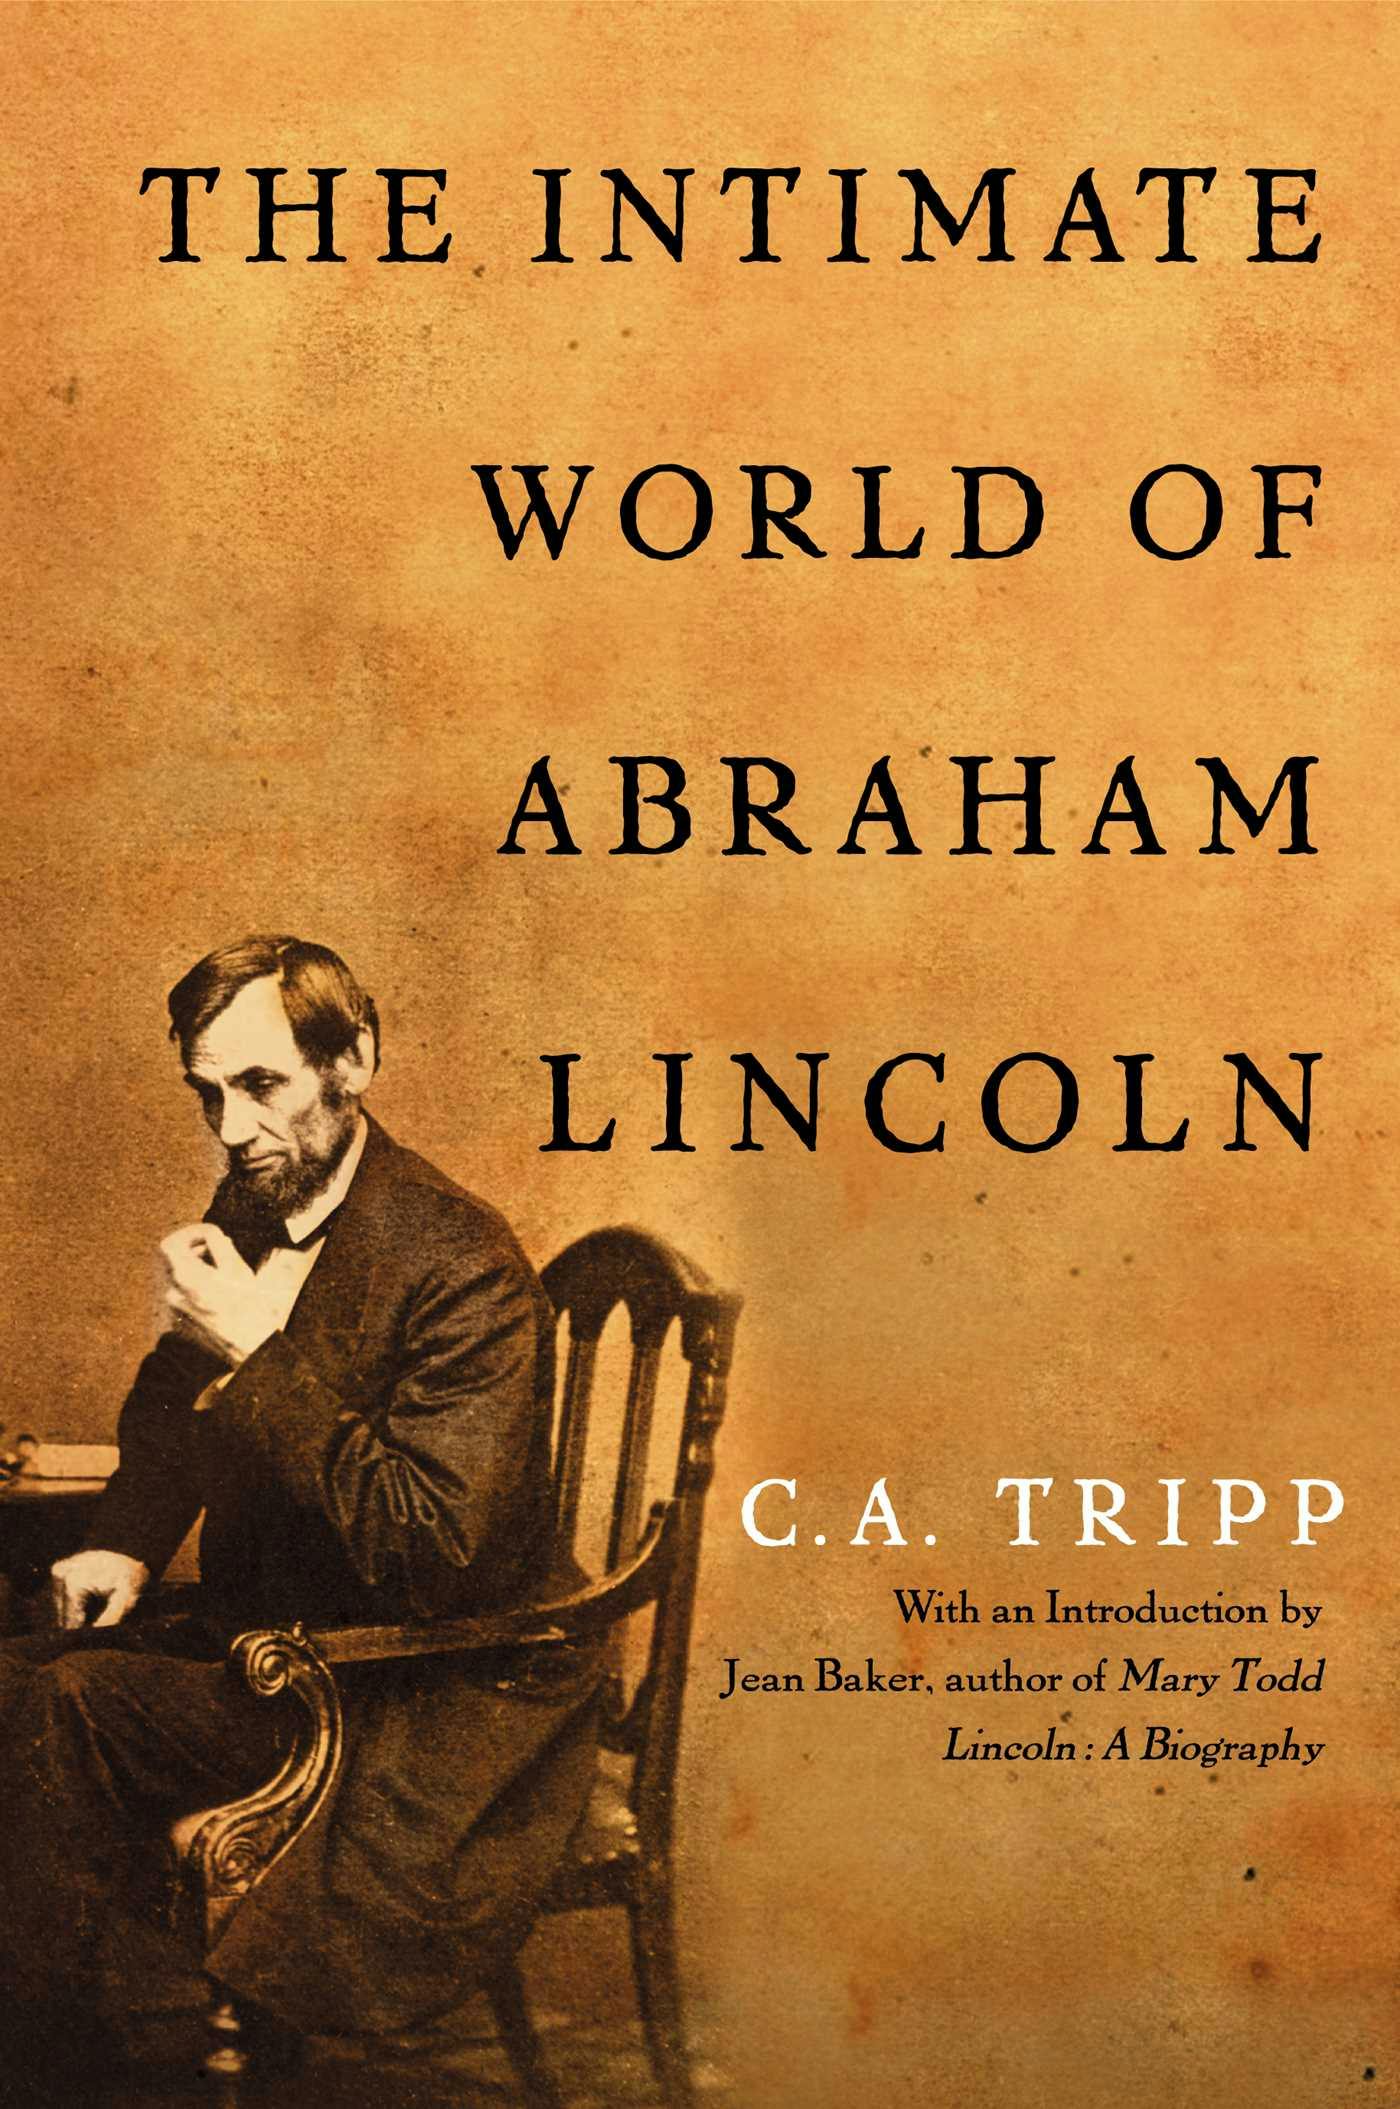 The Intimate World of Abraham Lincoln - C.A. Tripp